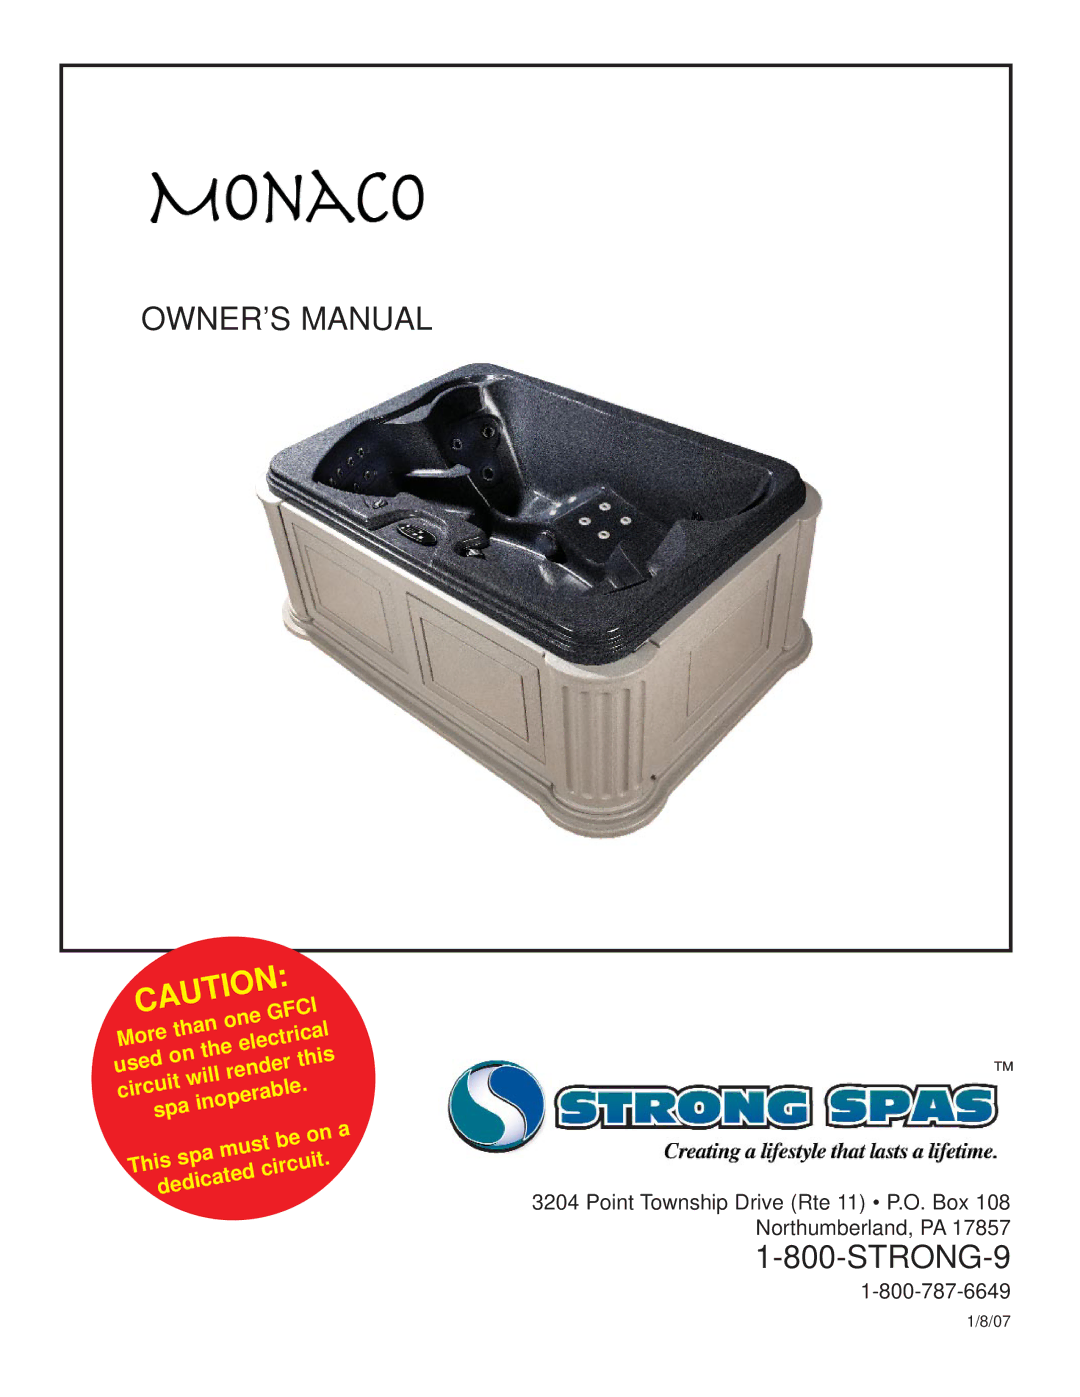 Strong Pools and Spas Monaco owner manual STRONG-9 